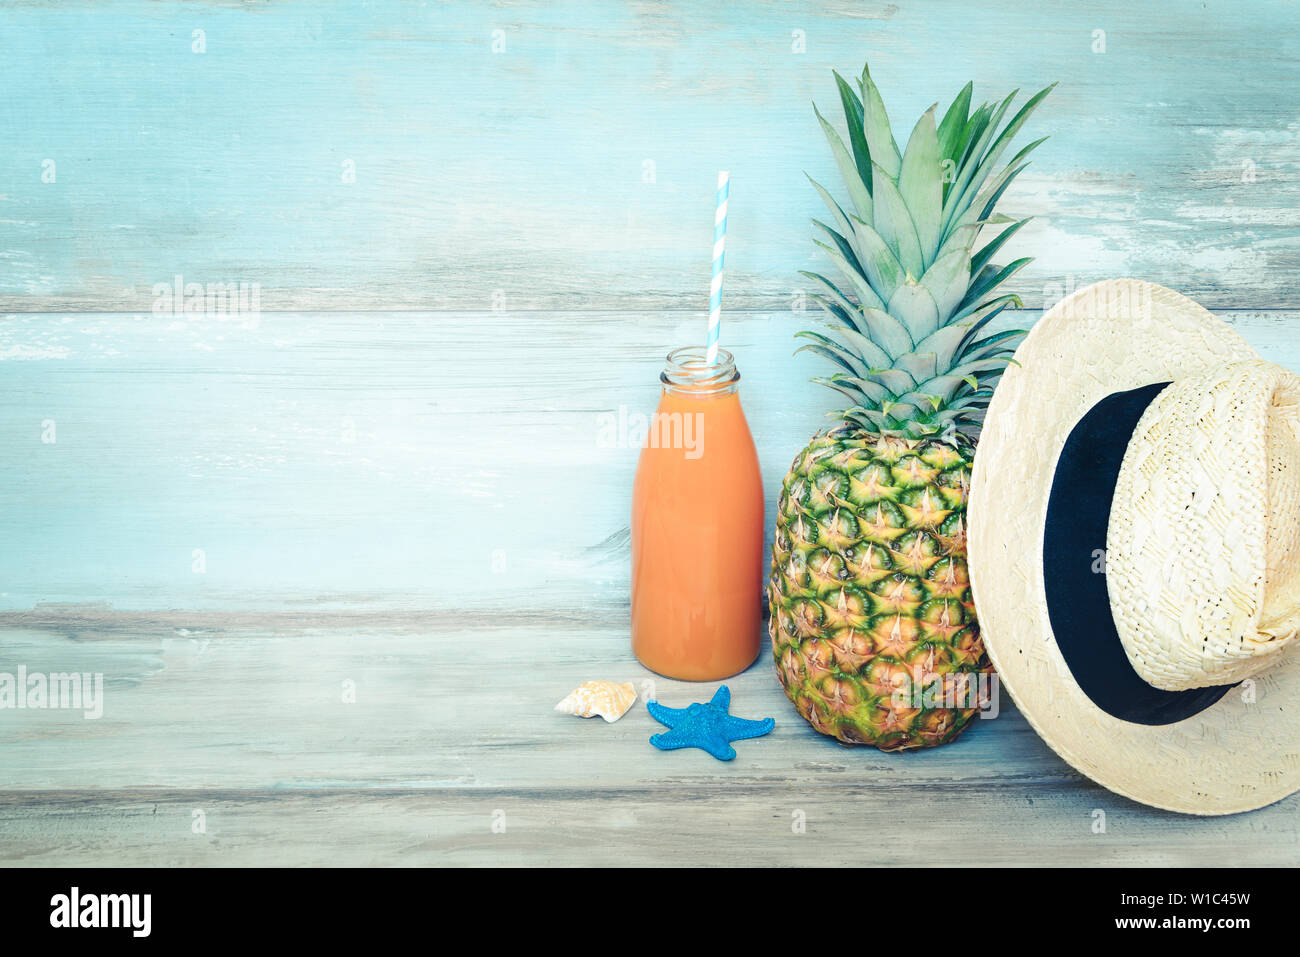 Summer concept stillife - ripe pineapple, straw hat and a bottle of multivitamin juice in front of a blue rustic wooden background. Stock Photo